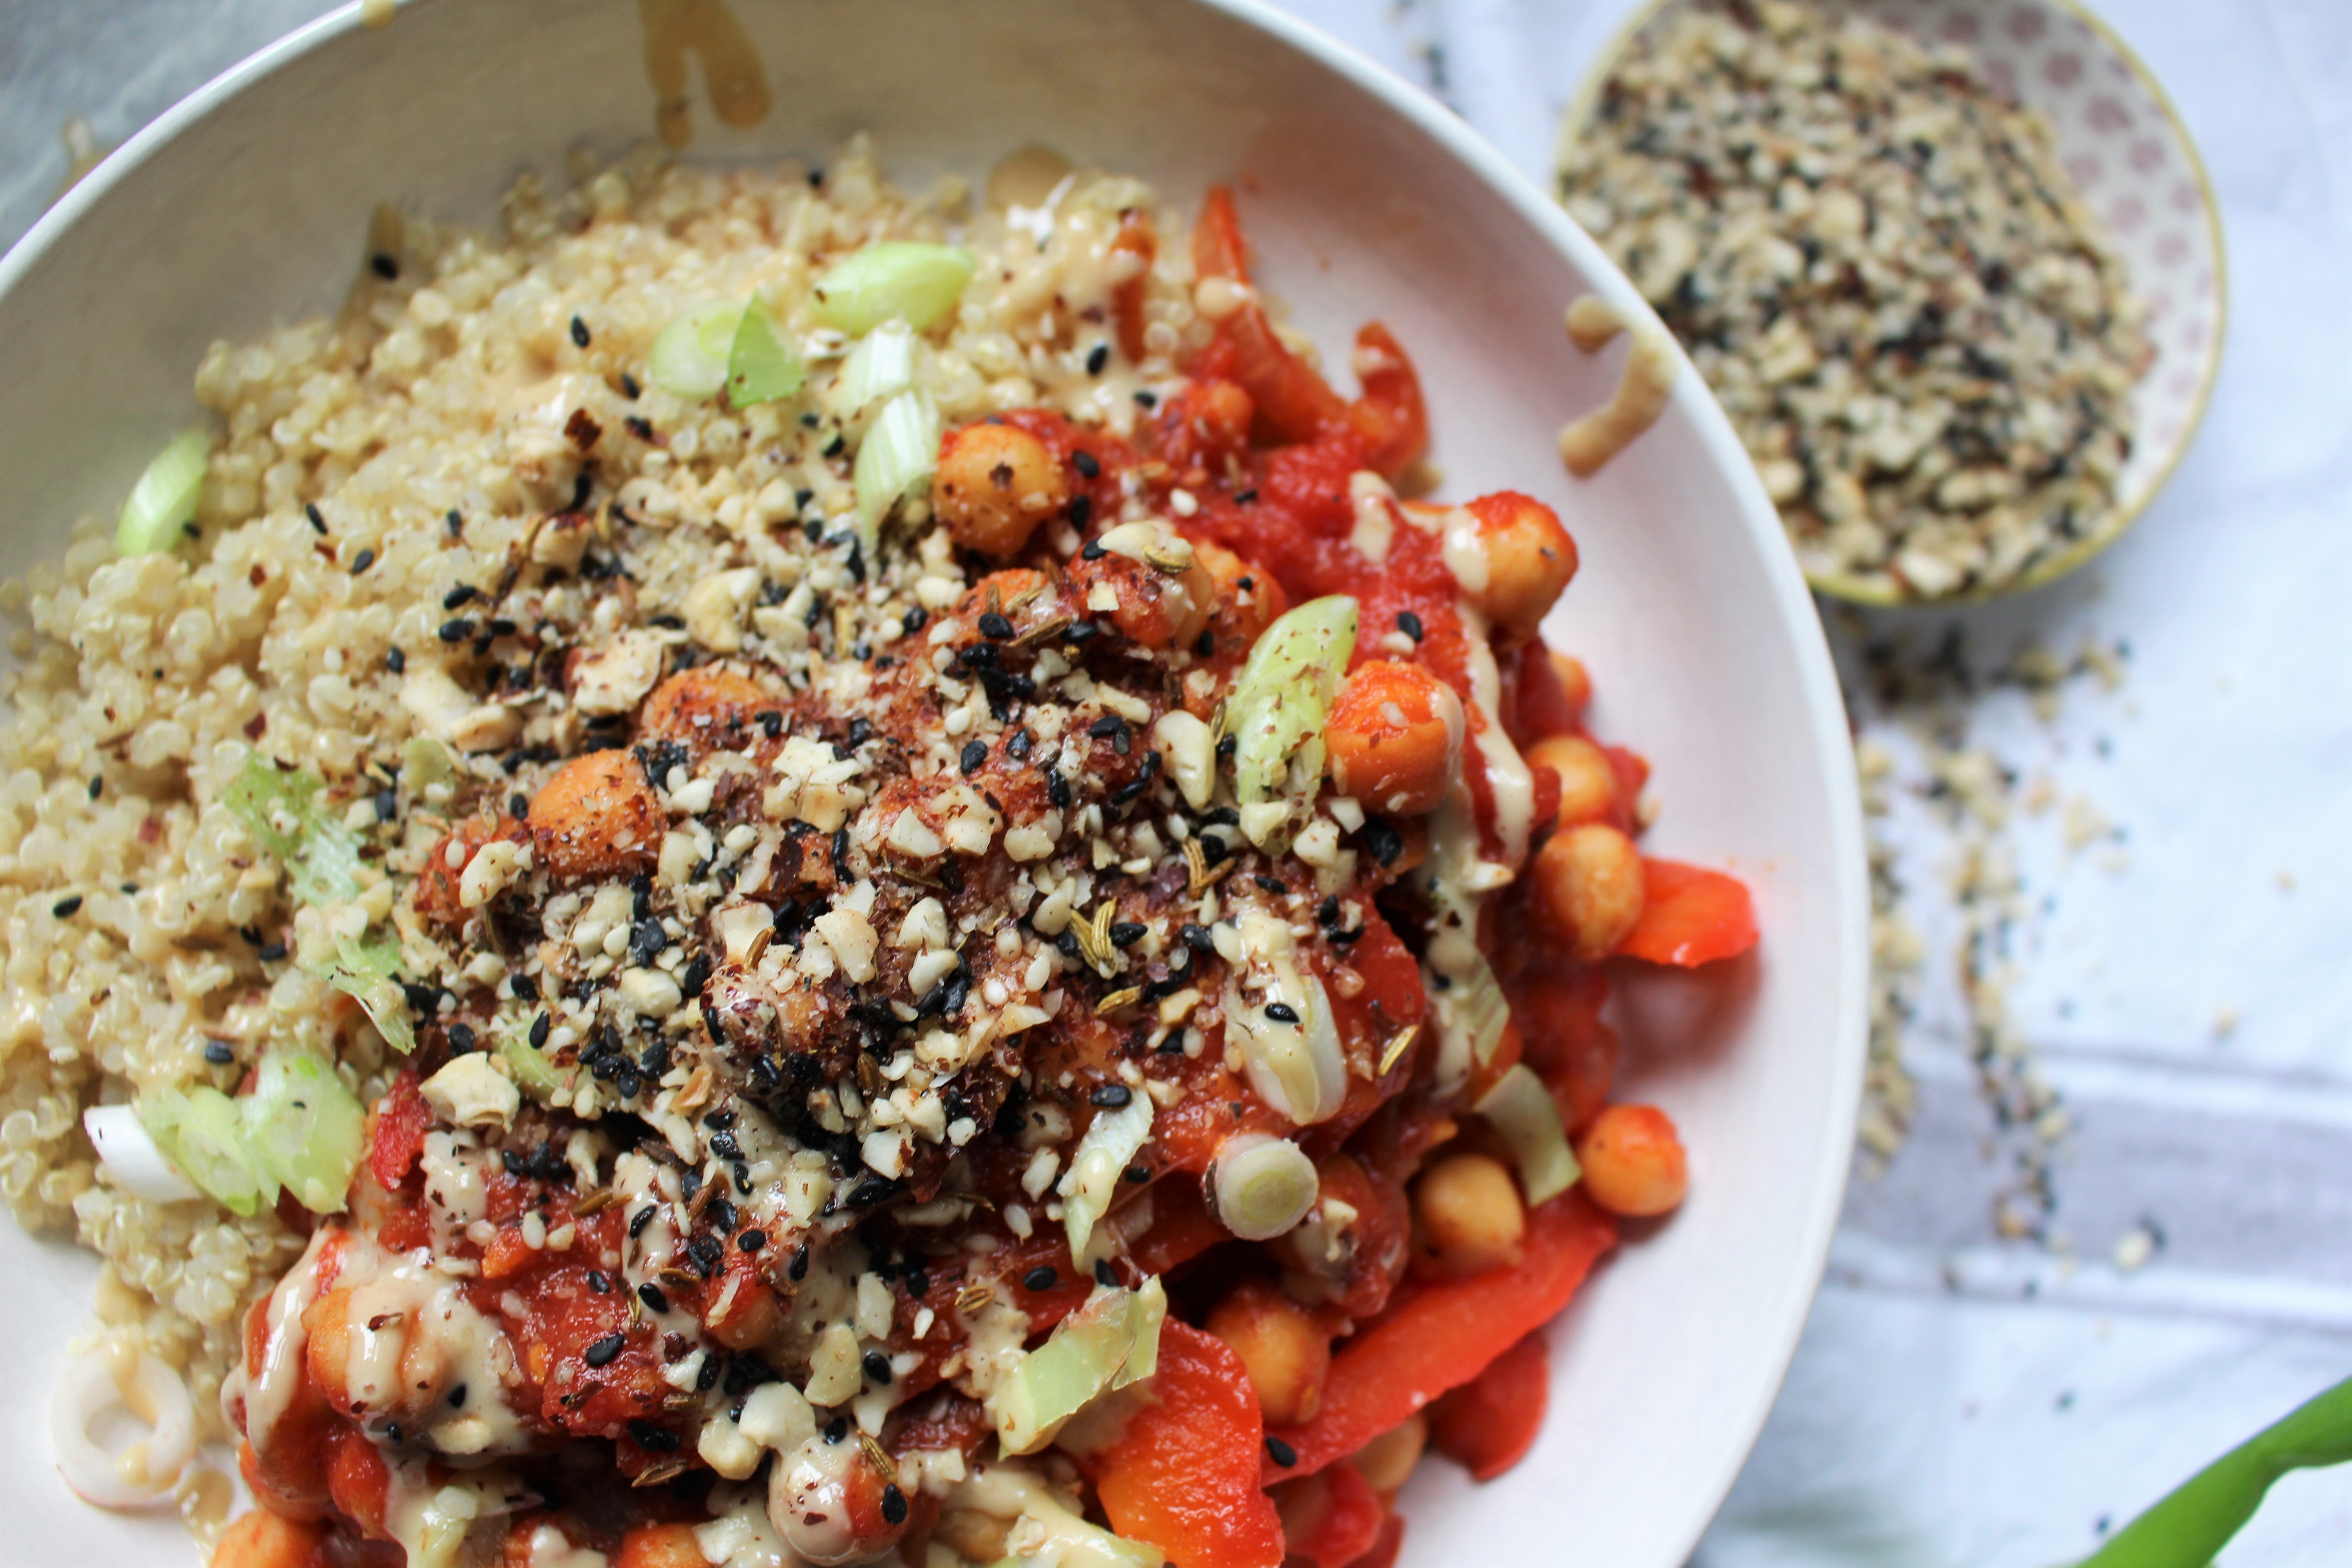 Rich Red Pepper and Chickpea Stew with Hazelnut Dukkha